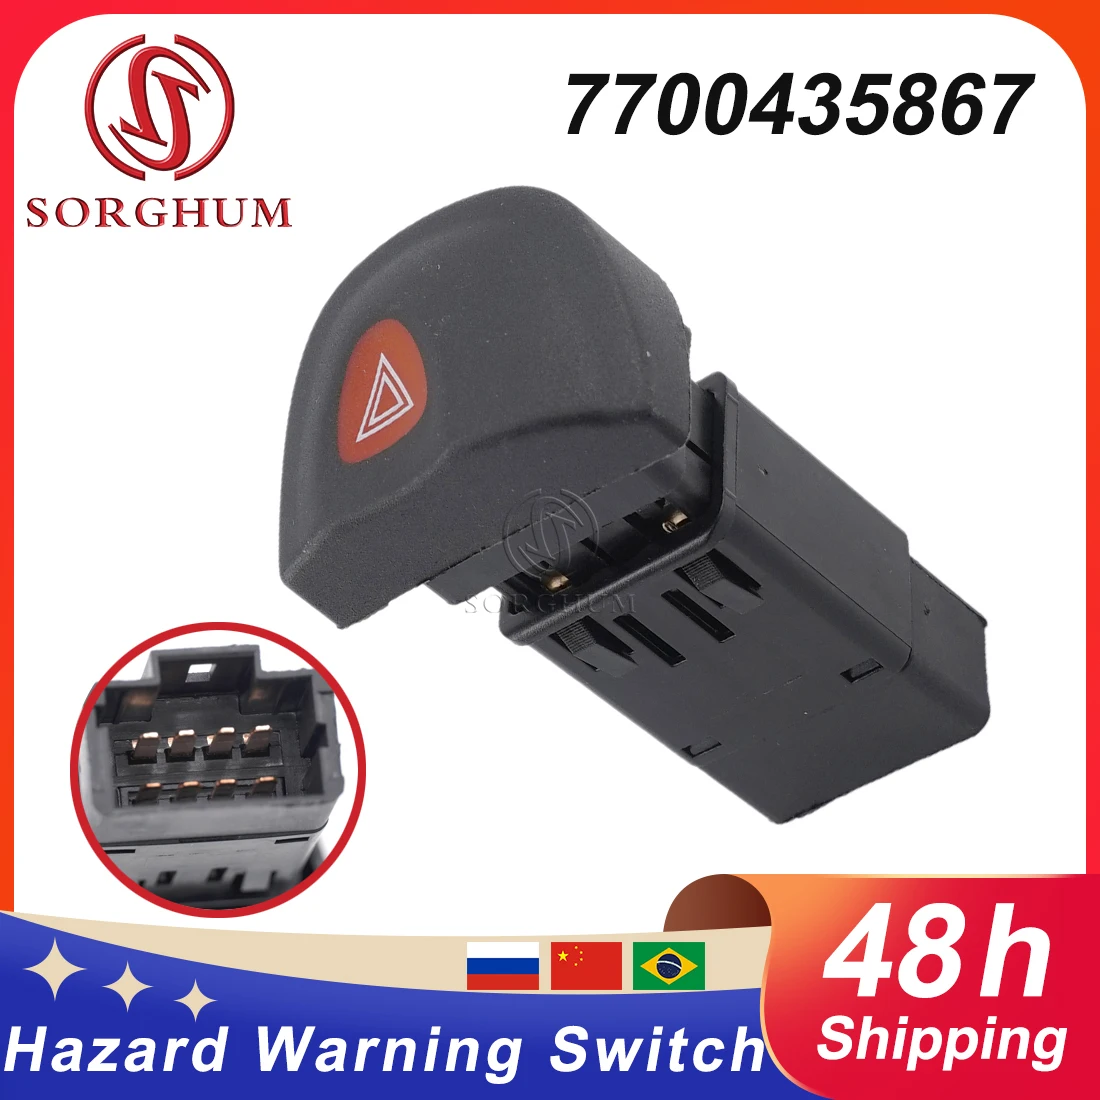 

Sorghum Car Accessories 8Pins Toggle Hazard Warning Switch Double Flash Lights Button For Renault Megane I MK1 95-03 7700435867